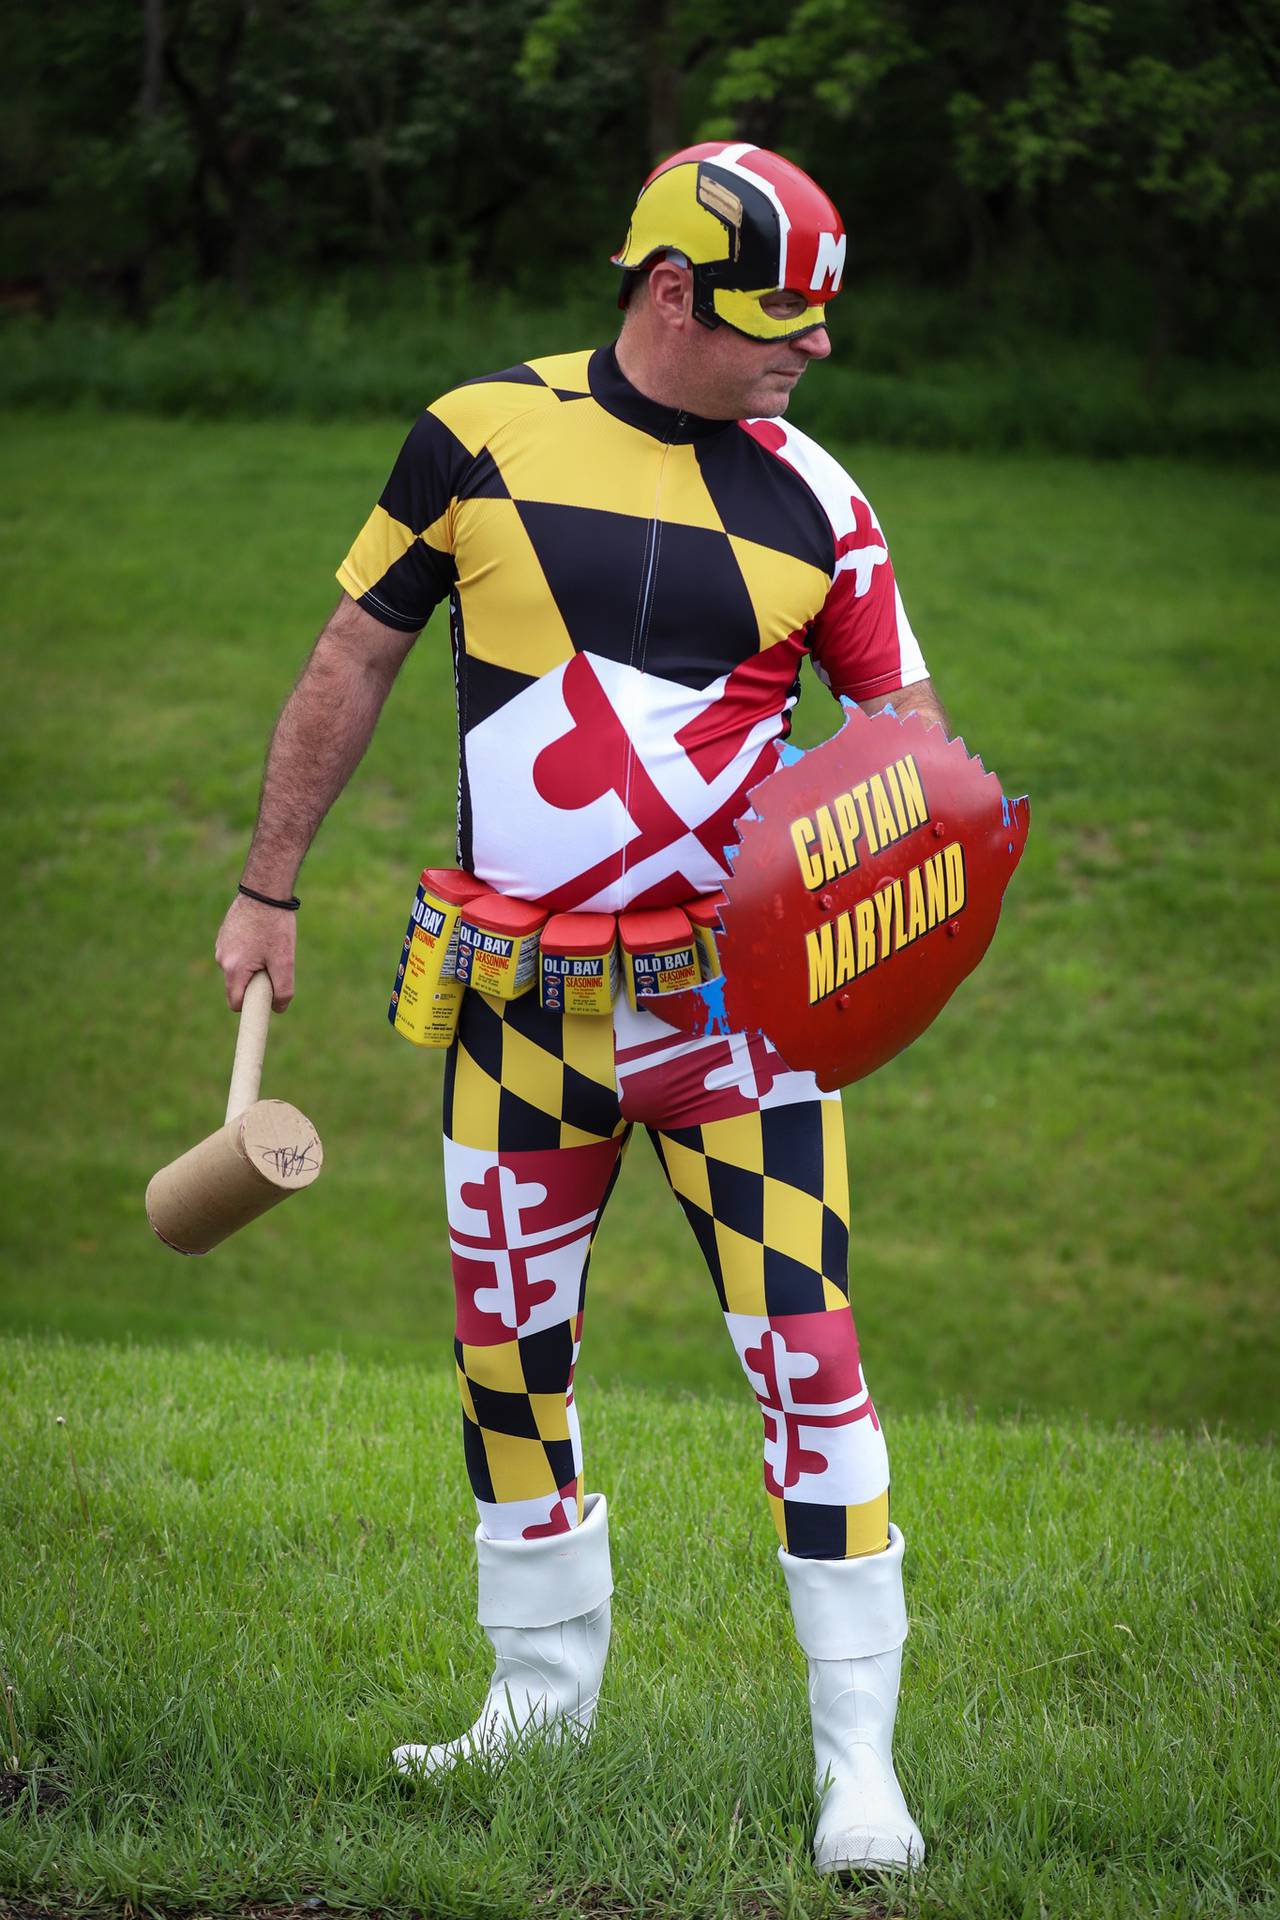 Clark Oliver wielding a crab mallet, Old Bay belt, and a crab shield as Captain Maryland.